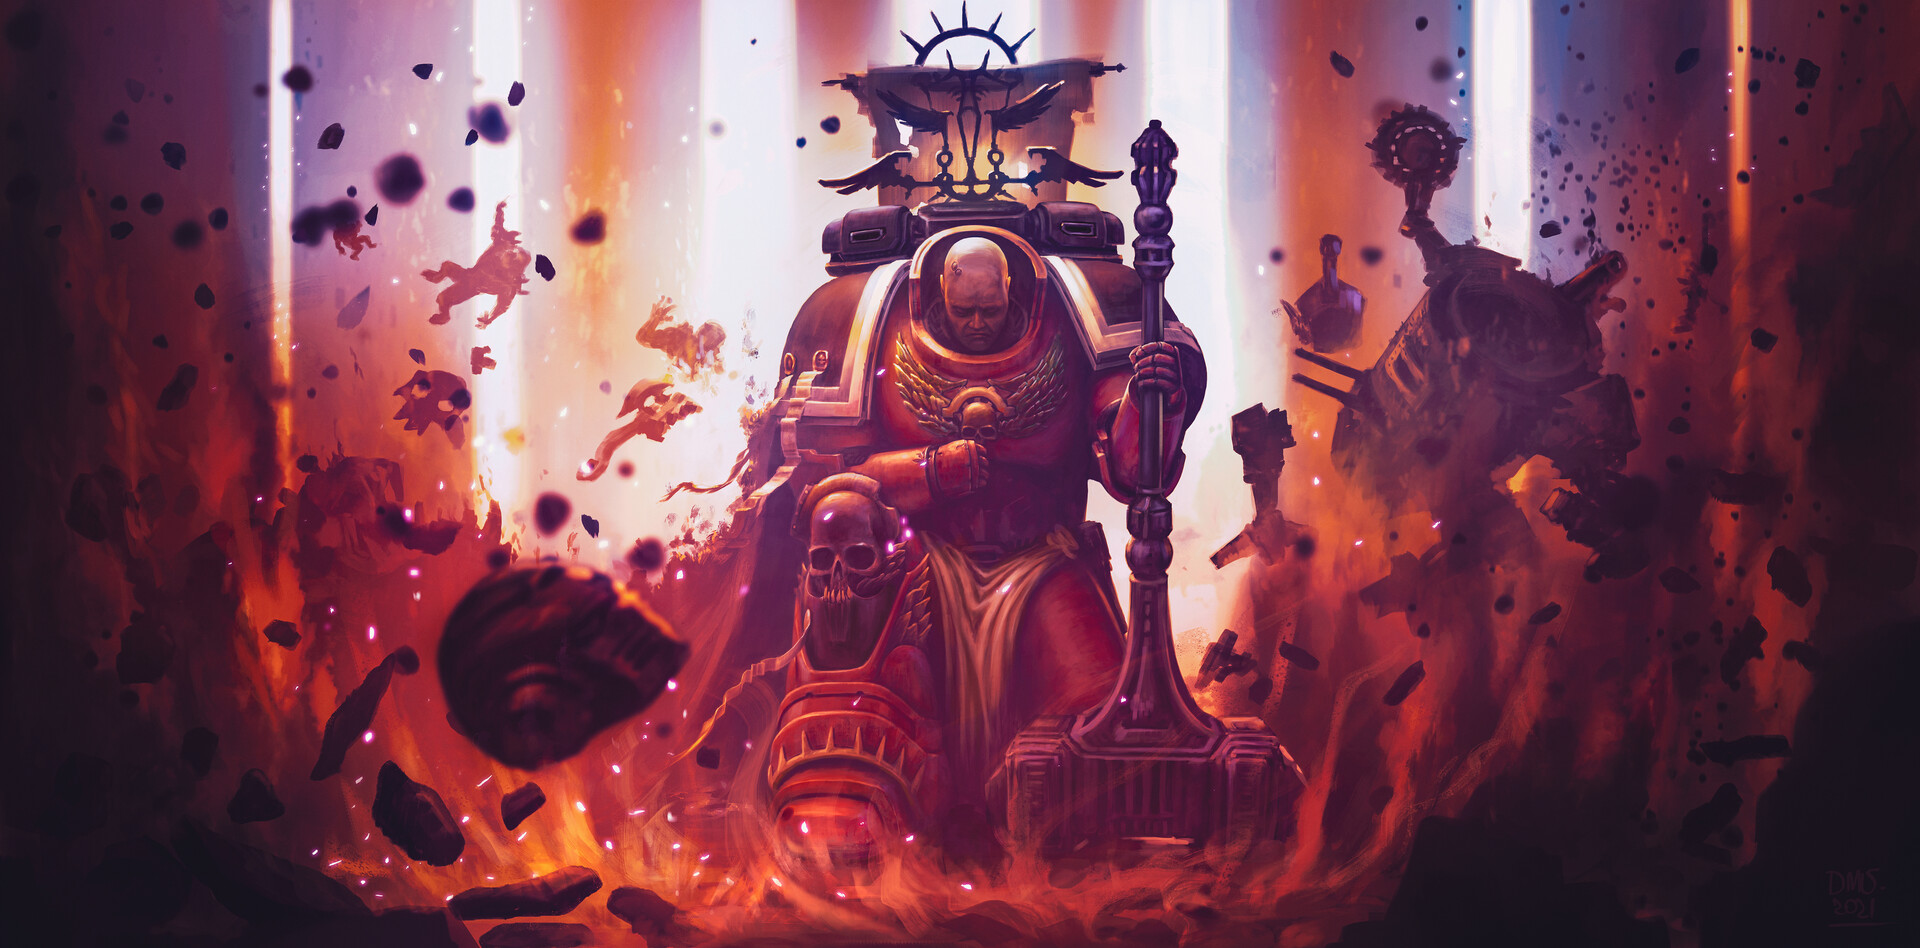 Science Fiction Warhammer 40 000 Warhammer Video Games Video Game Art Video Game Characters 1920x948